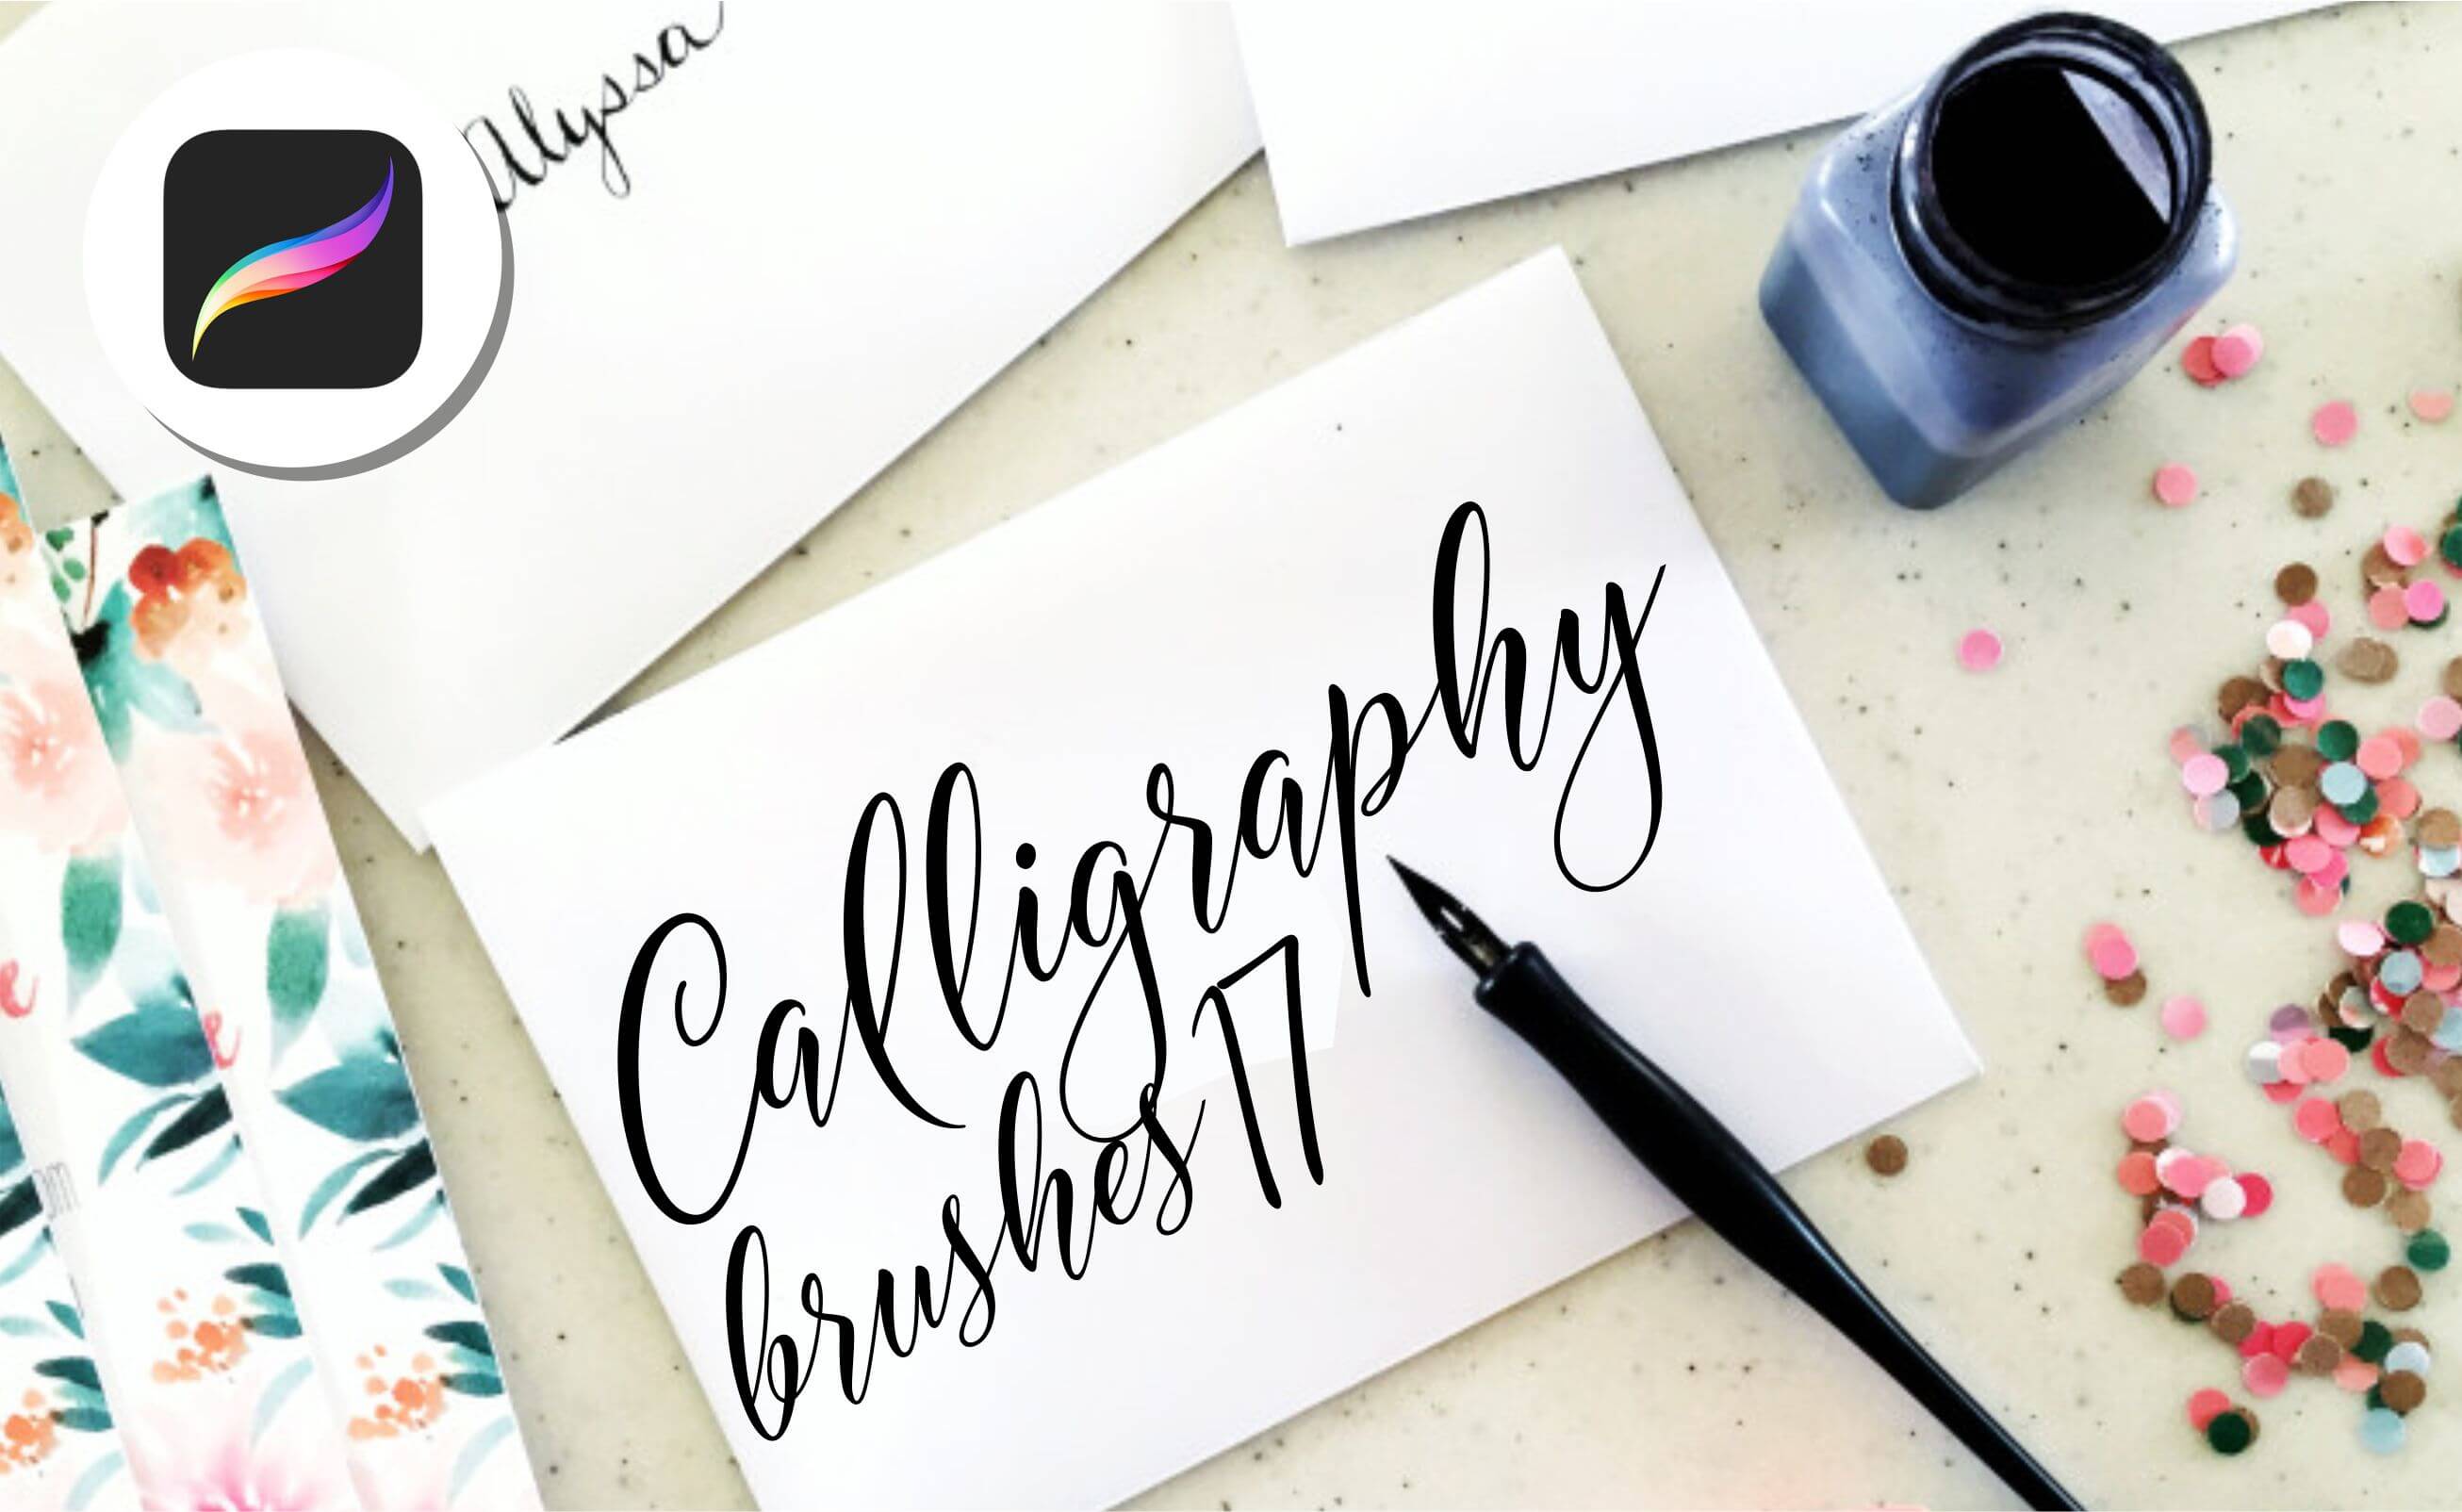 17 beautiful calligraphy brushes for procreate - Free Brushes for